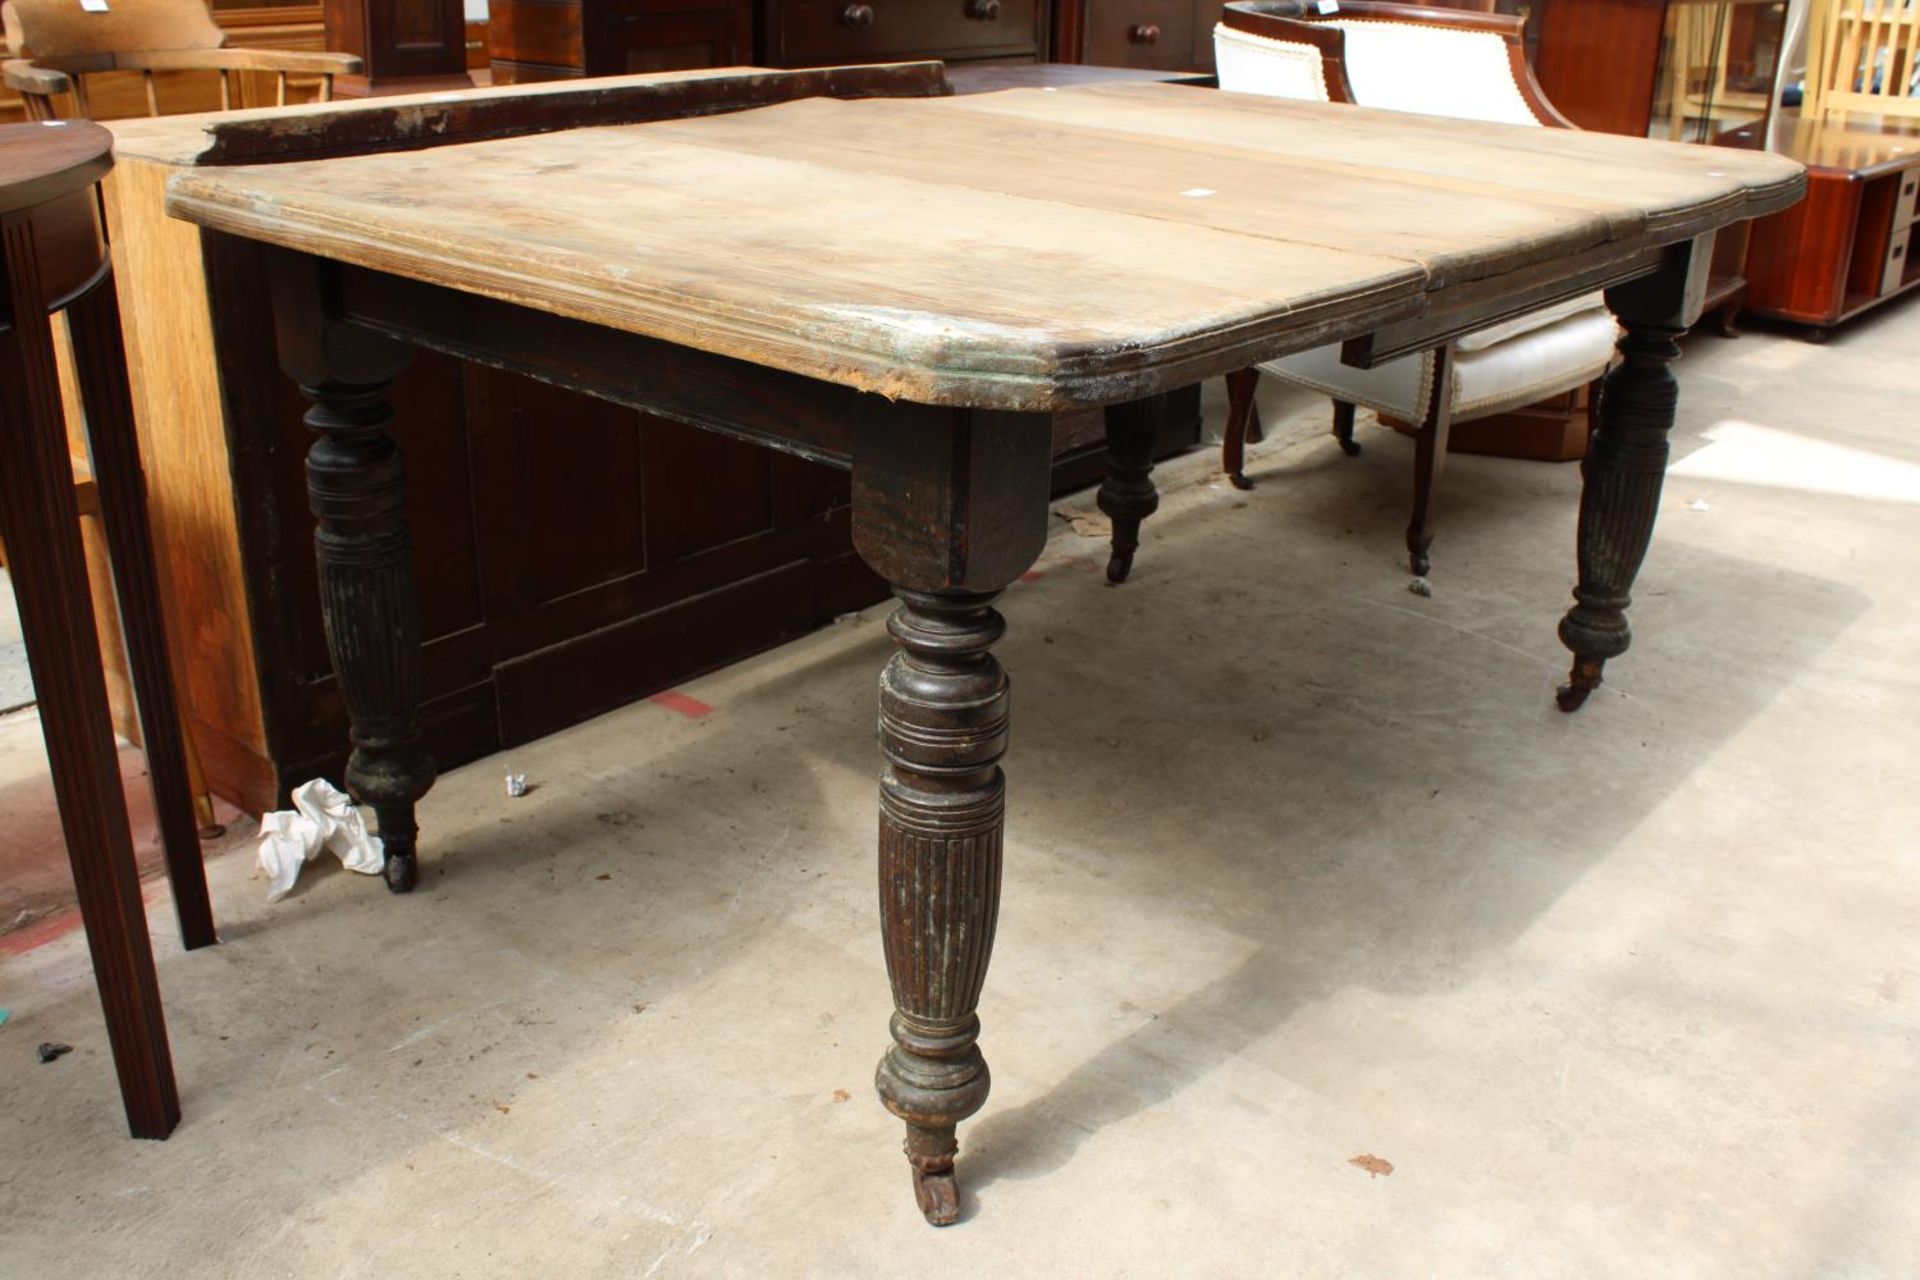 A LATE VICTORIAN SCRUB TOP WIND-OUT DINING TABLE WITH CANTED CORNERS ON TURNED AND FLUTED LEGS - Image 2 of 3